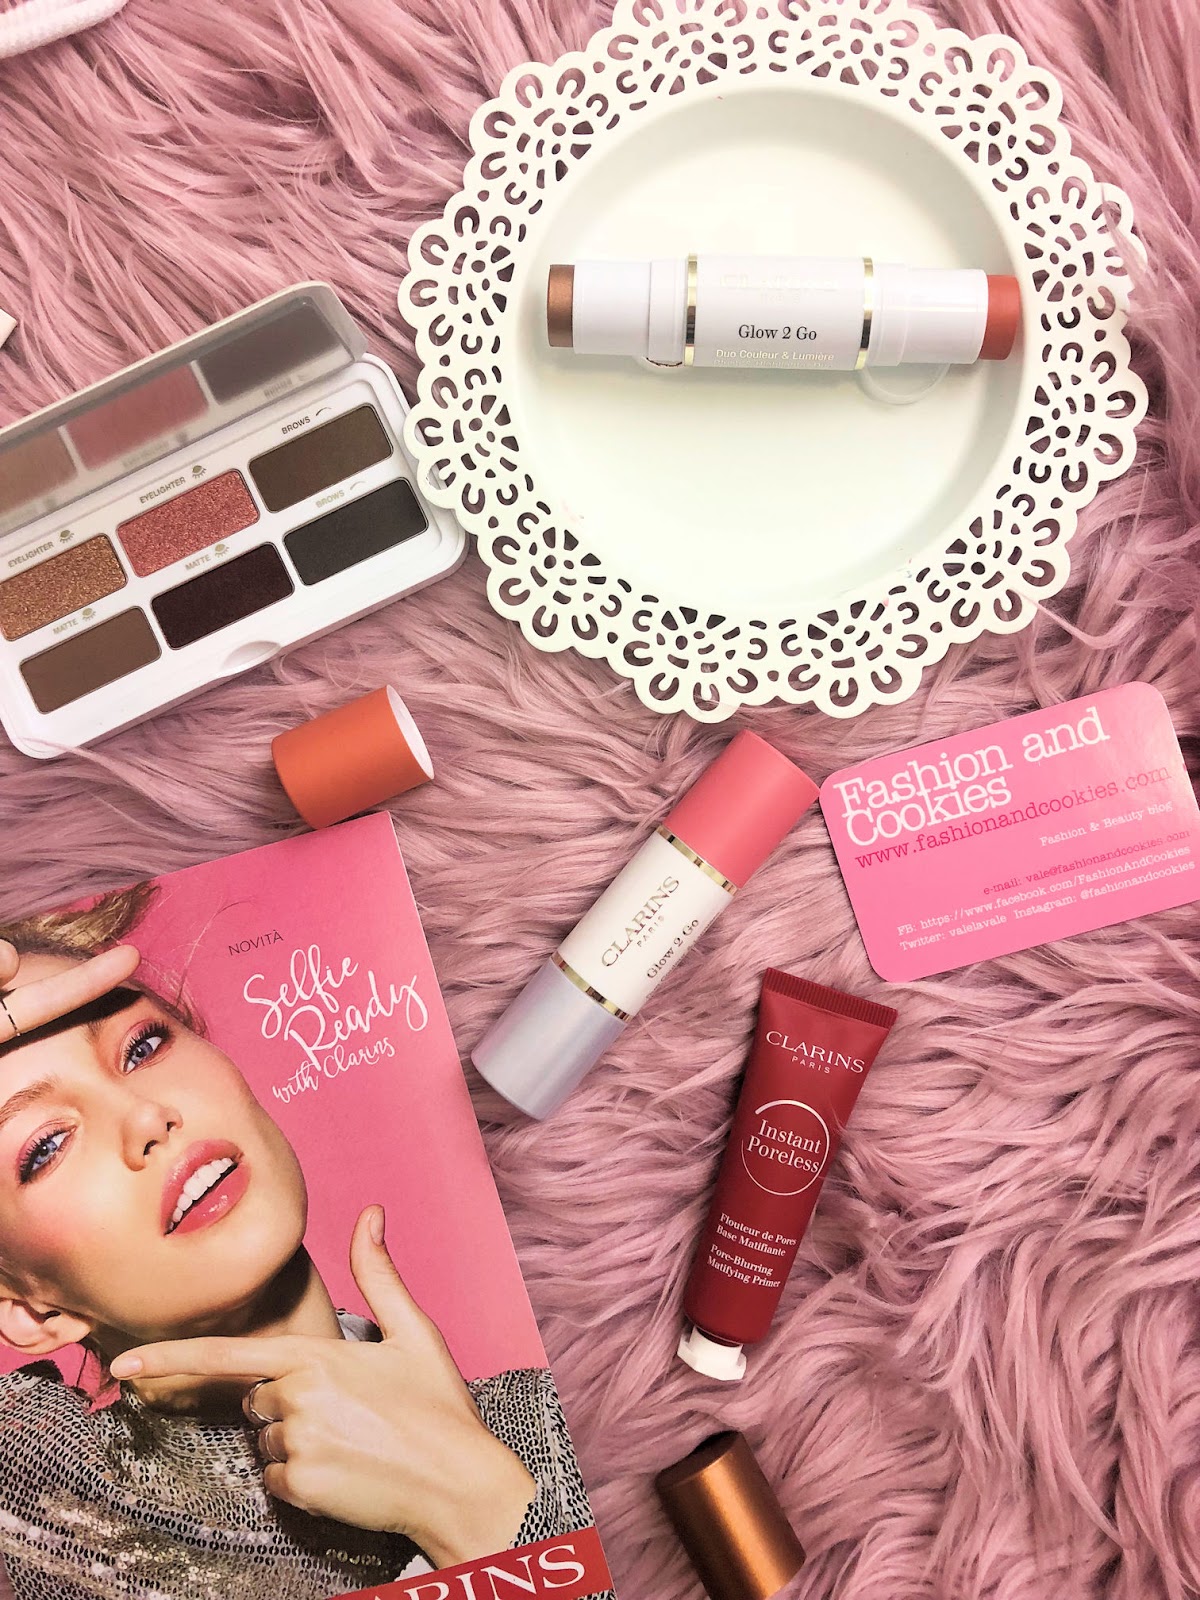 Clarins Selfie Ready collezione makeup primavera 2019 on Fashion and Cookies beauty blog, beauty blogger